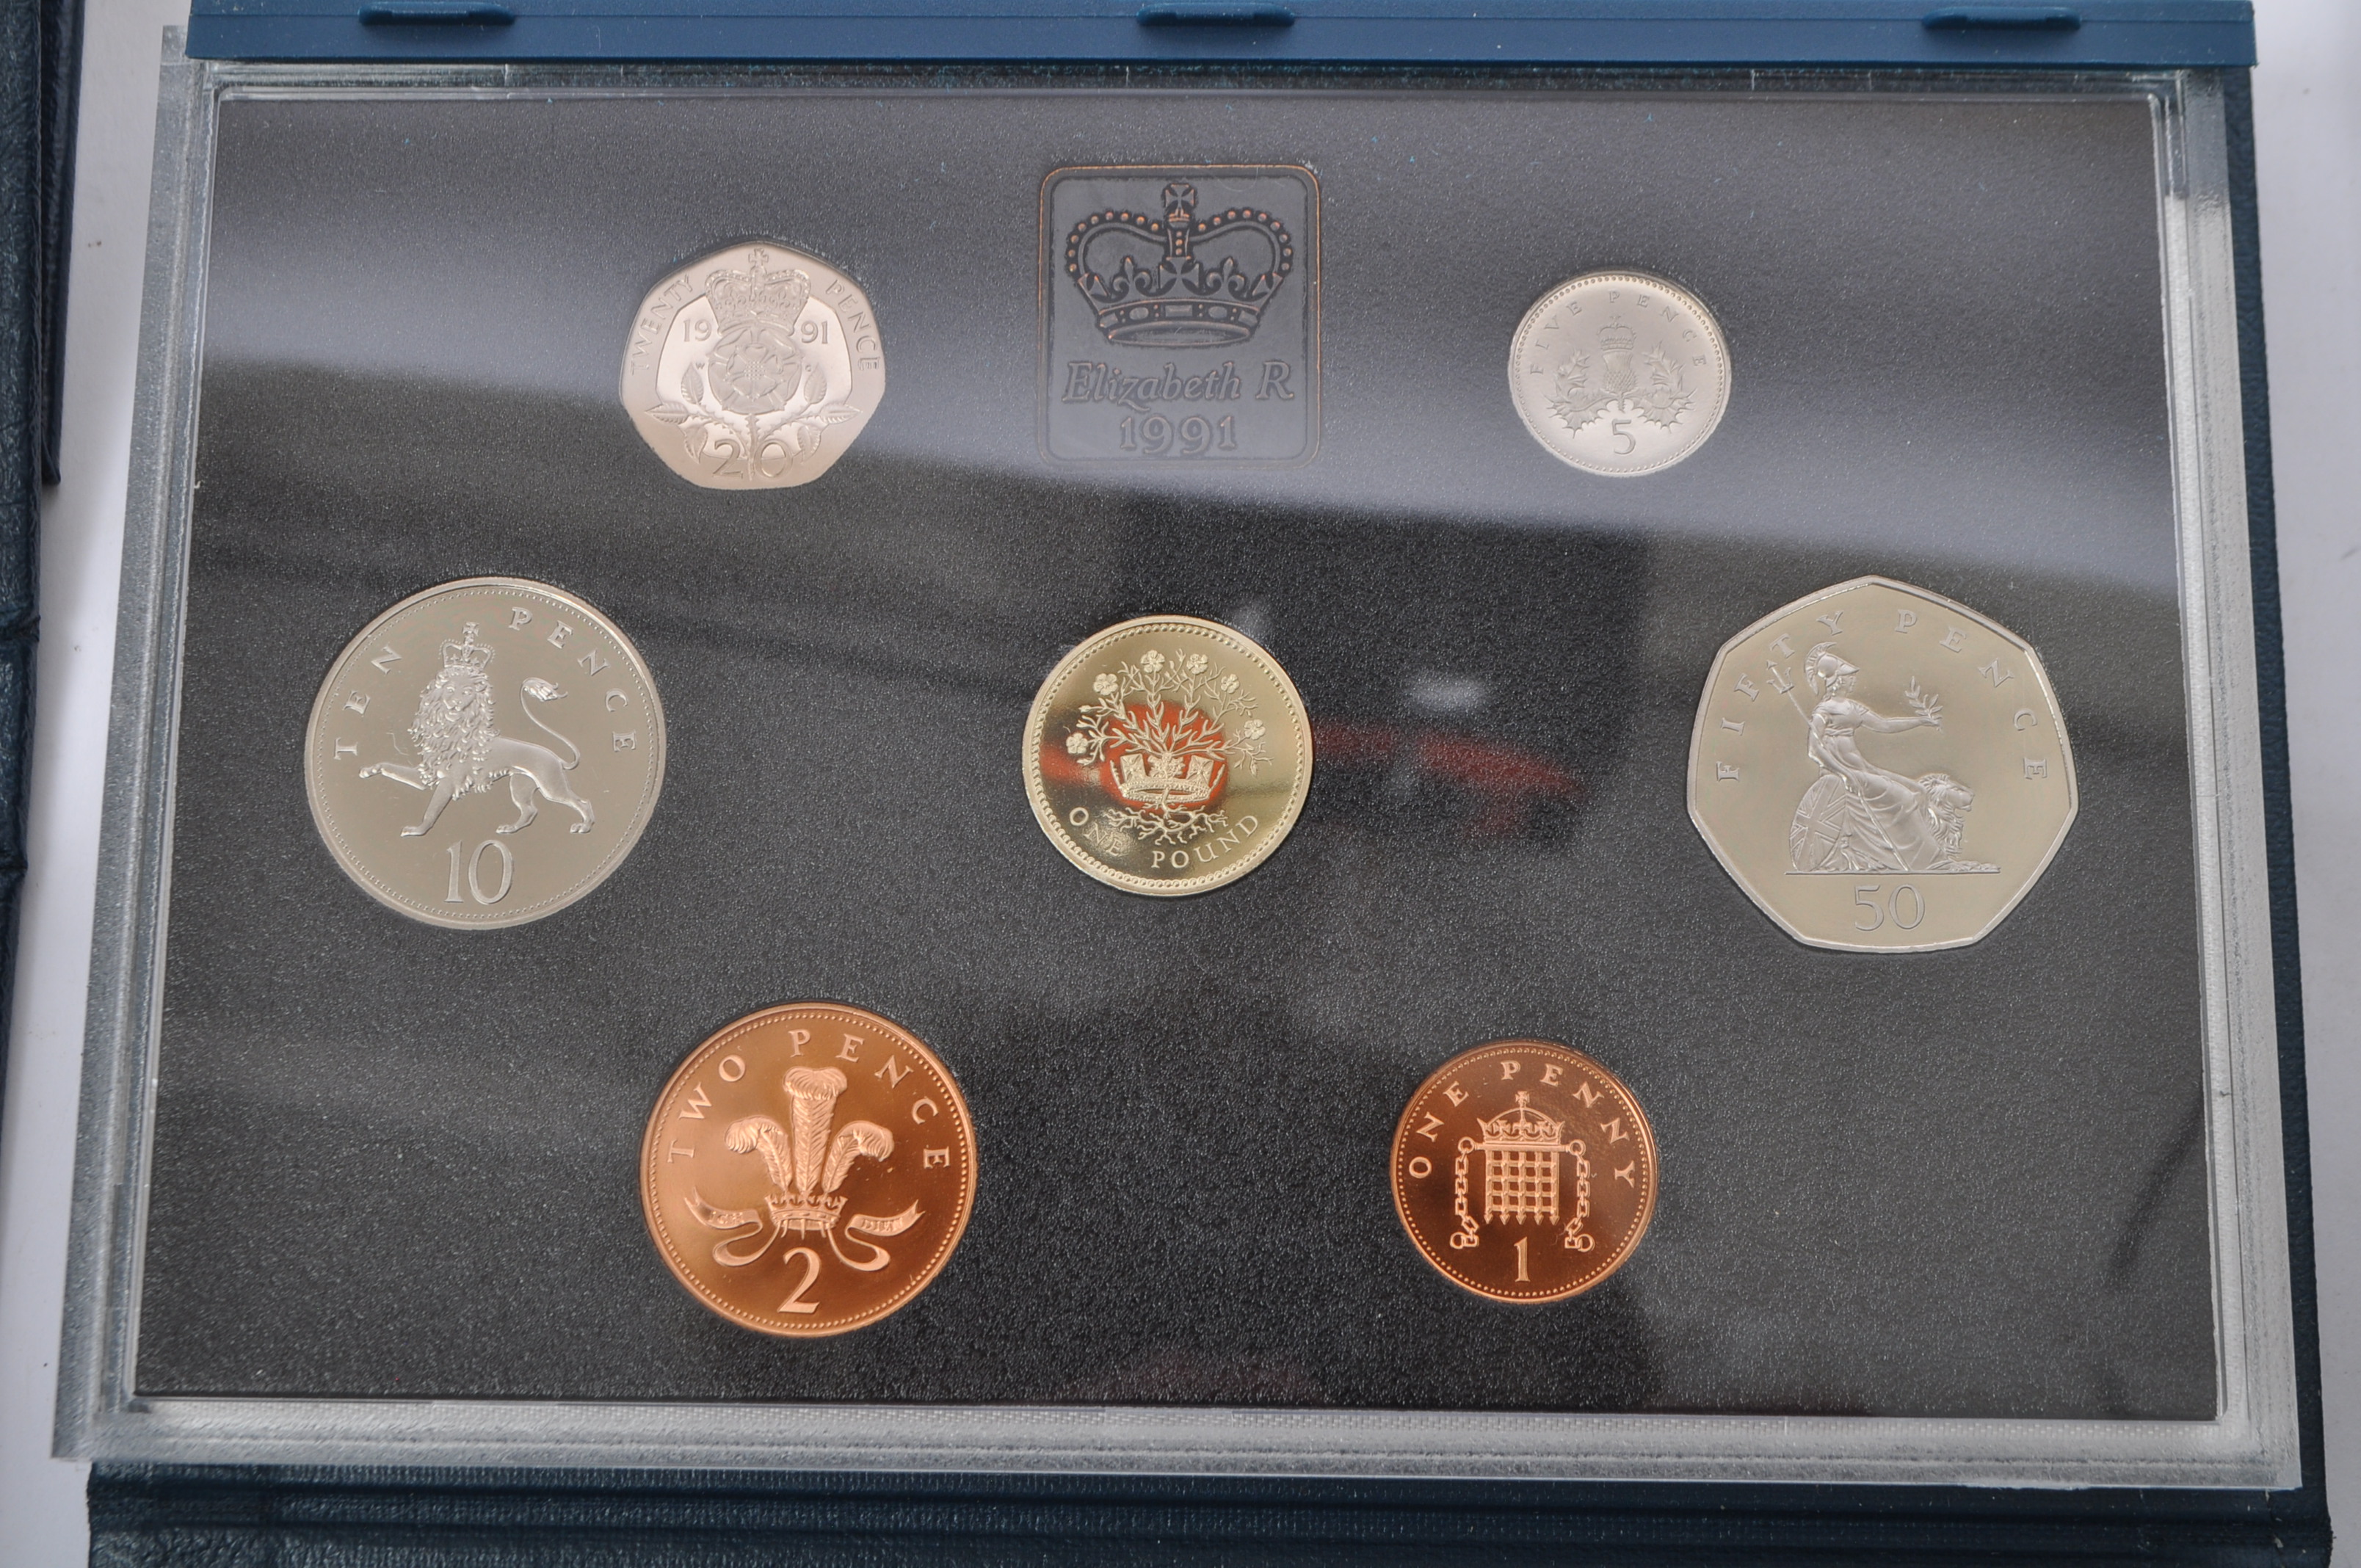 THE ROYAL MINT UNITED KINGDOM PROOF COIN COLLECTION PACKS - Image 4 of 6